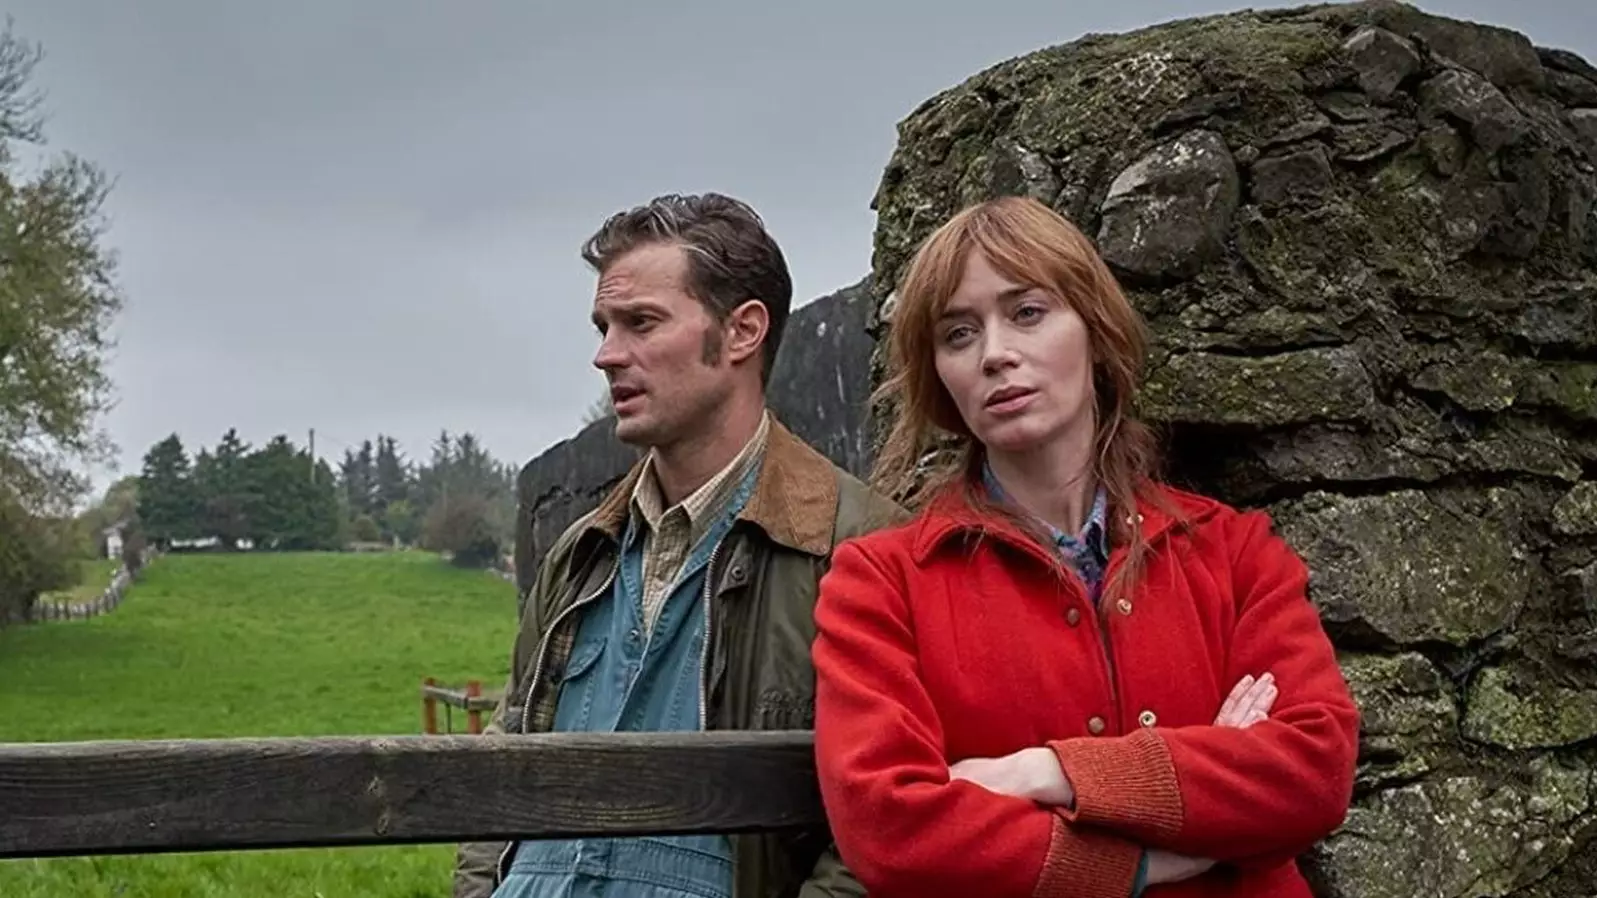 People Are Howling Over The Irish Accents In Emily Blunt's New Rom-Com 'Wild Mountain Thyme'